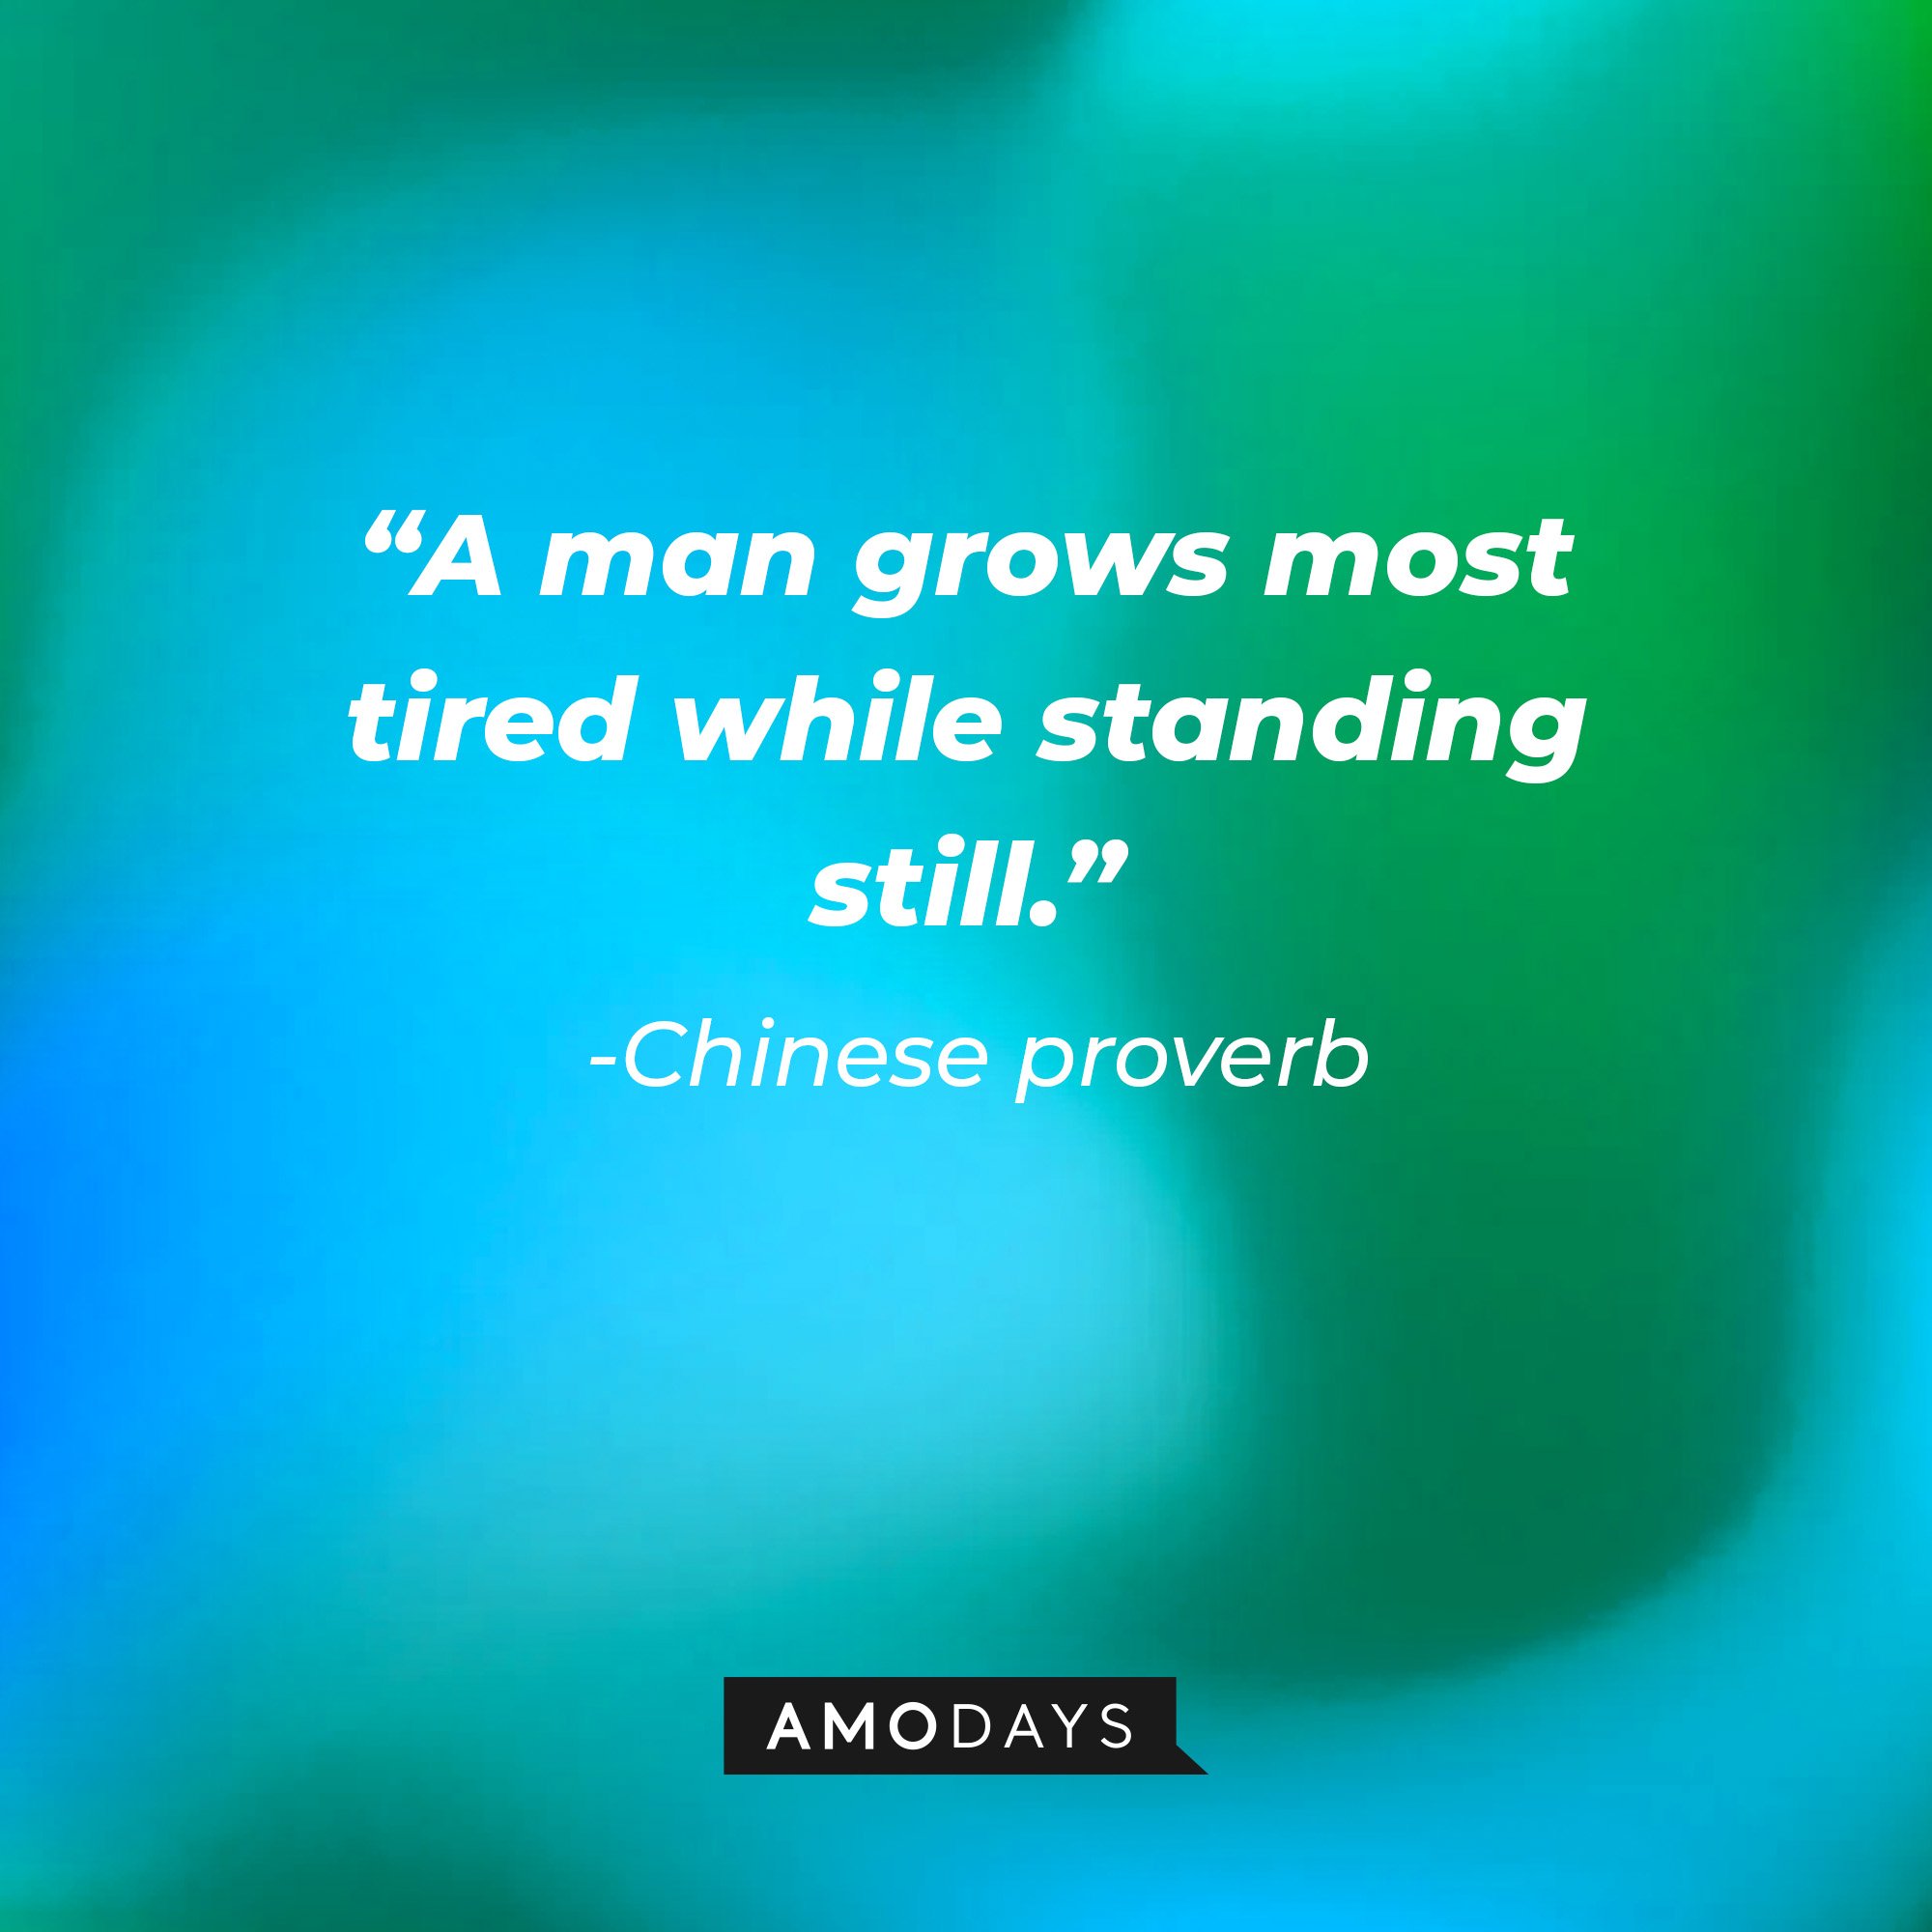 Chinese proverb's quote: “A man grows most tired while standing still.” —| Image: AmoDays